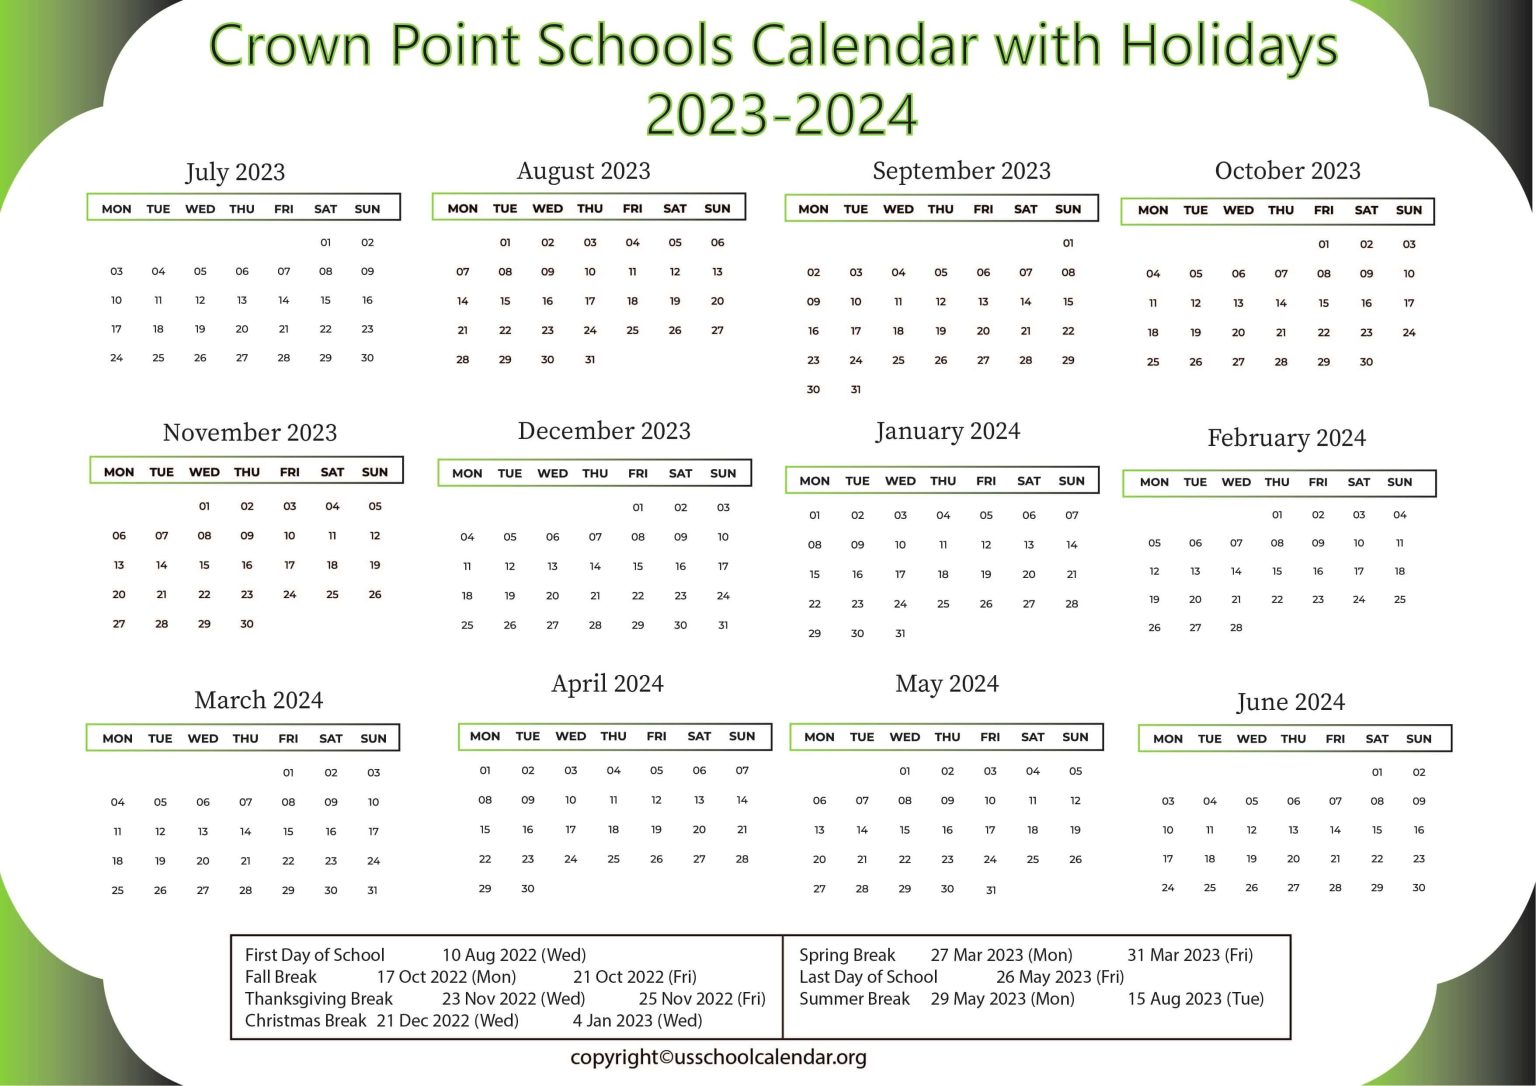 Crown Point Schools Calendar with Holidays 2023 2024 CPS